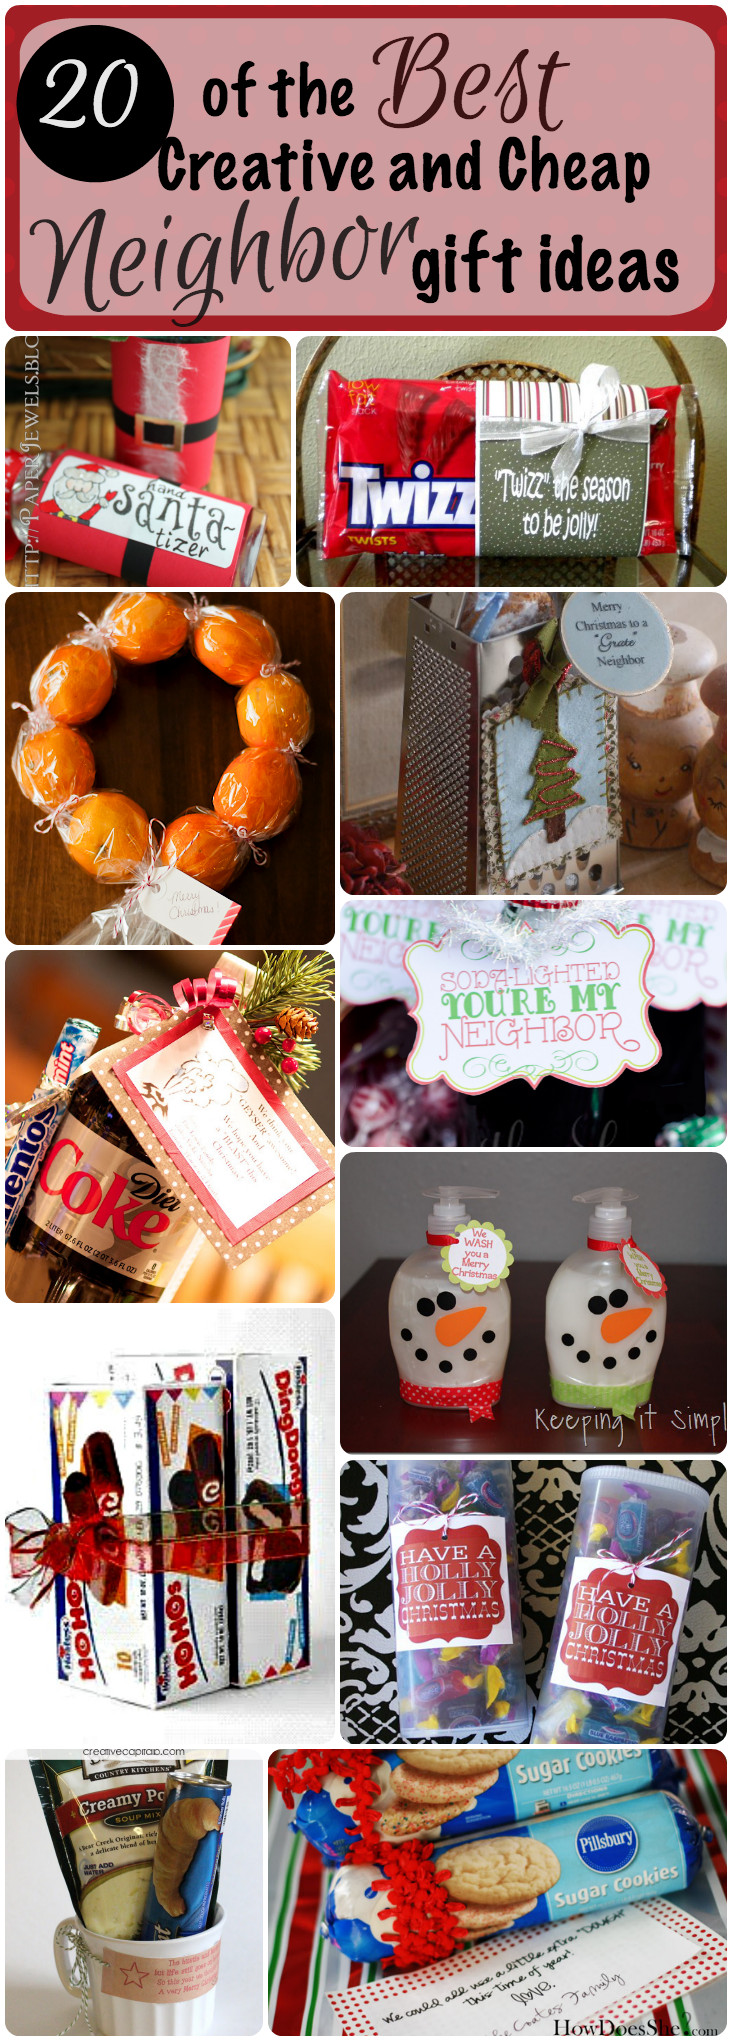 Holiday Gift Ideas For Neighbors
 20 Best Creative And Cheap Neighbor Gifts For Christmas